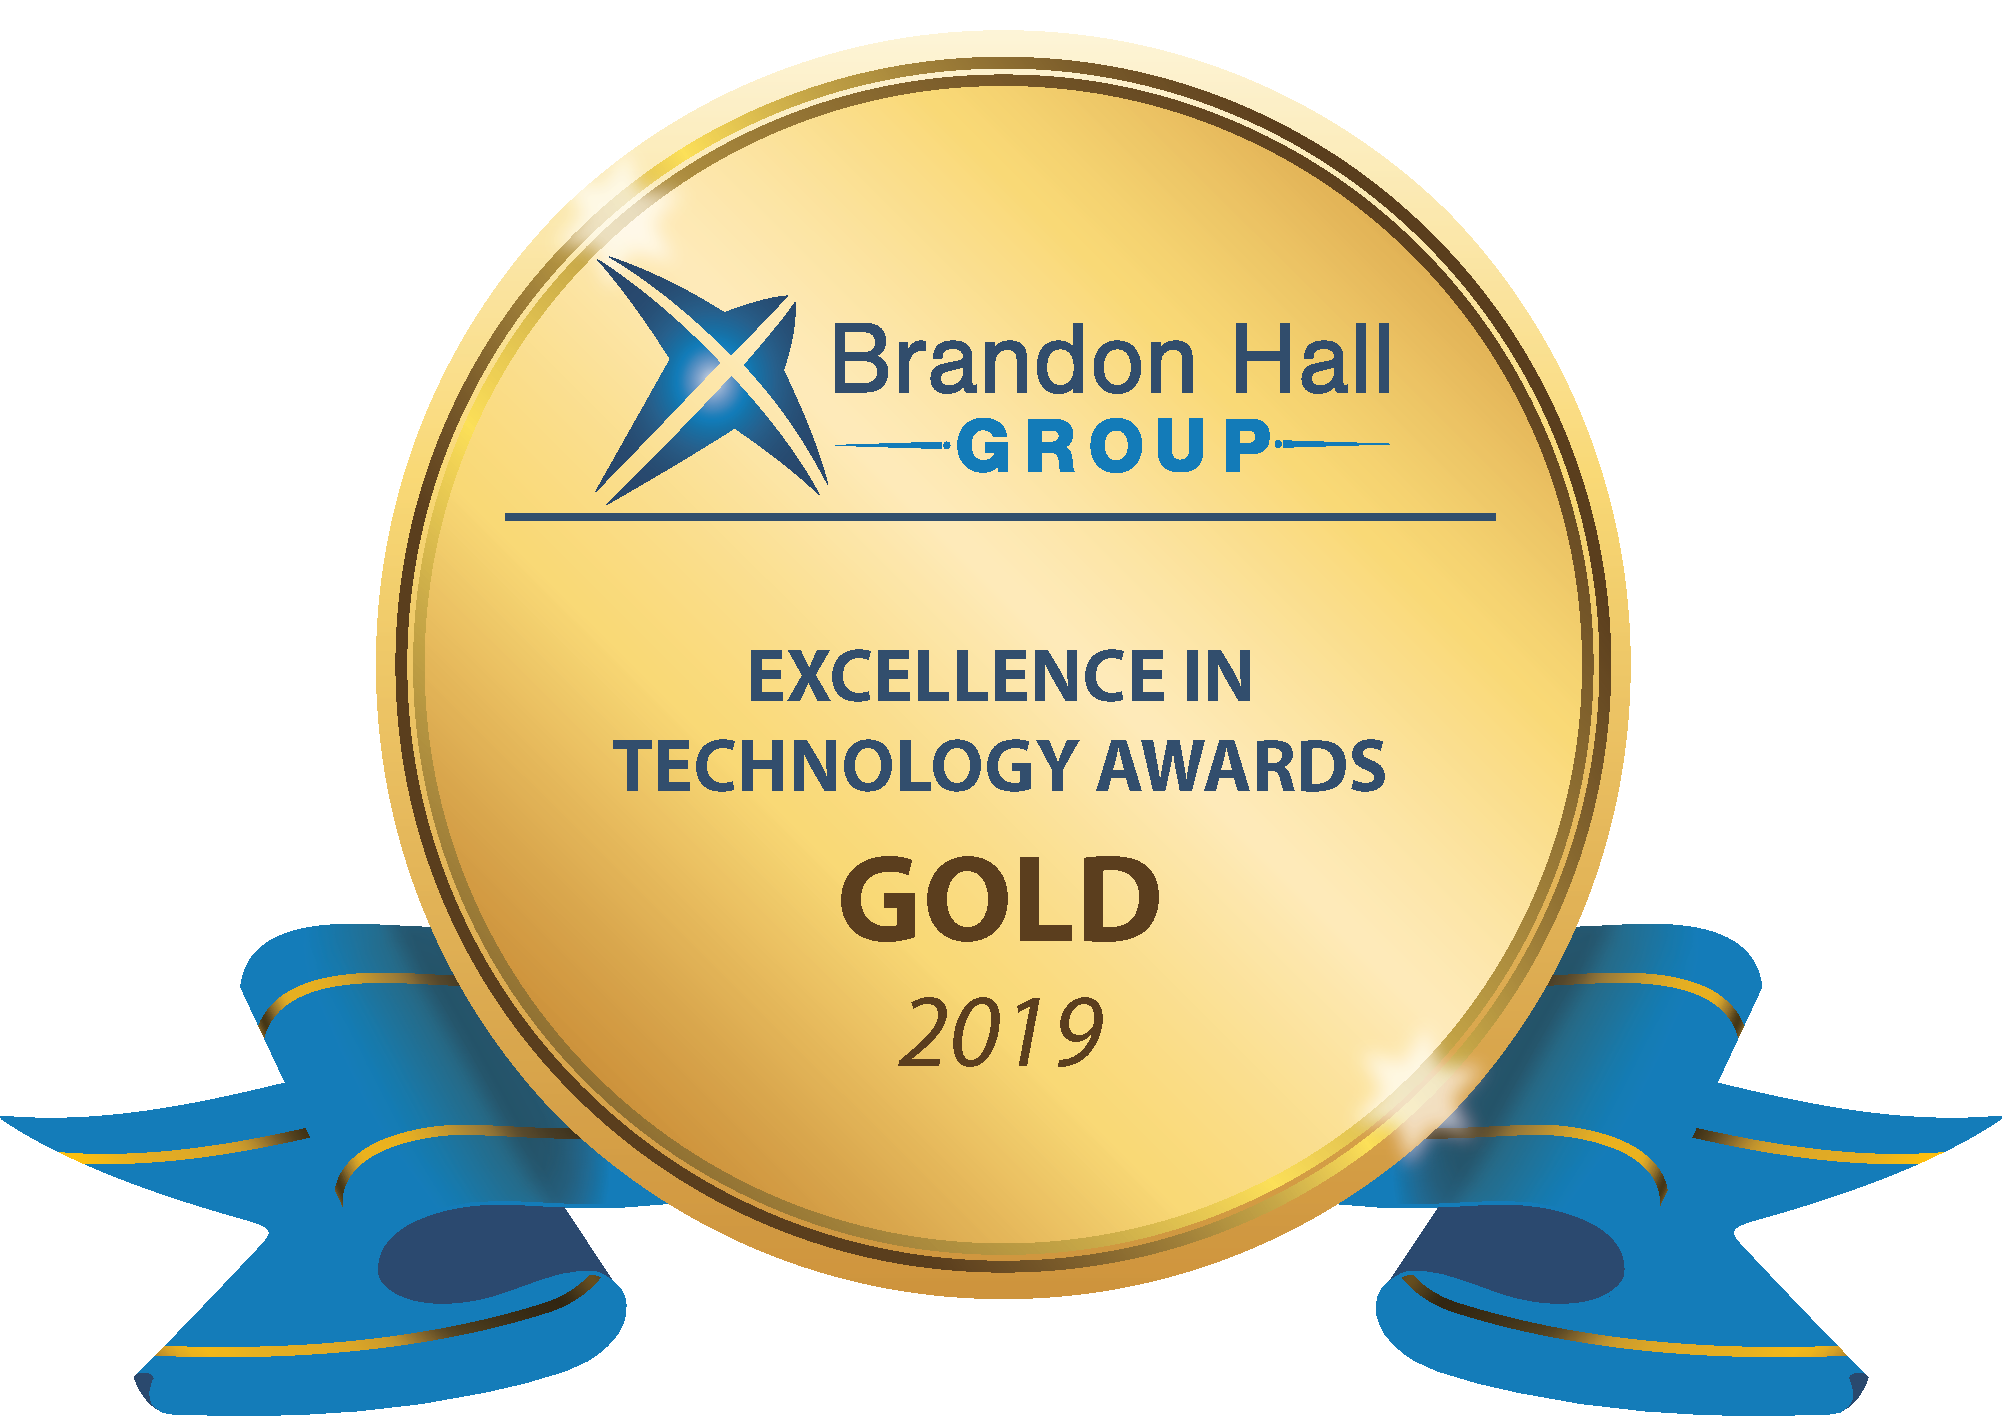 Brandon Hall 2017 - Gold Award for Best Advance in Online Mentoring Tools